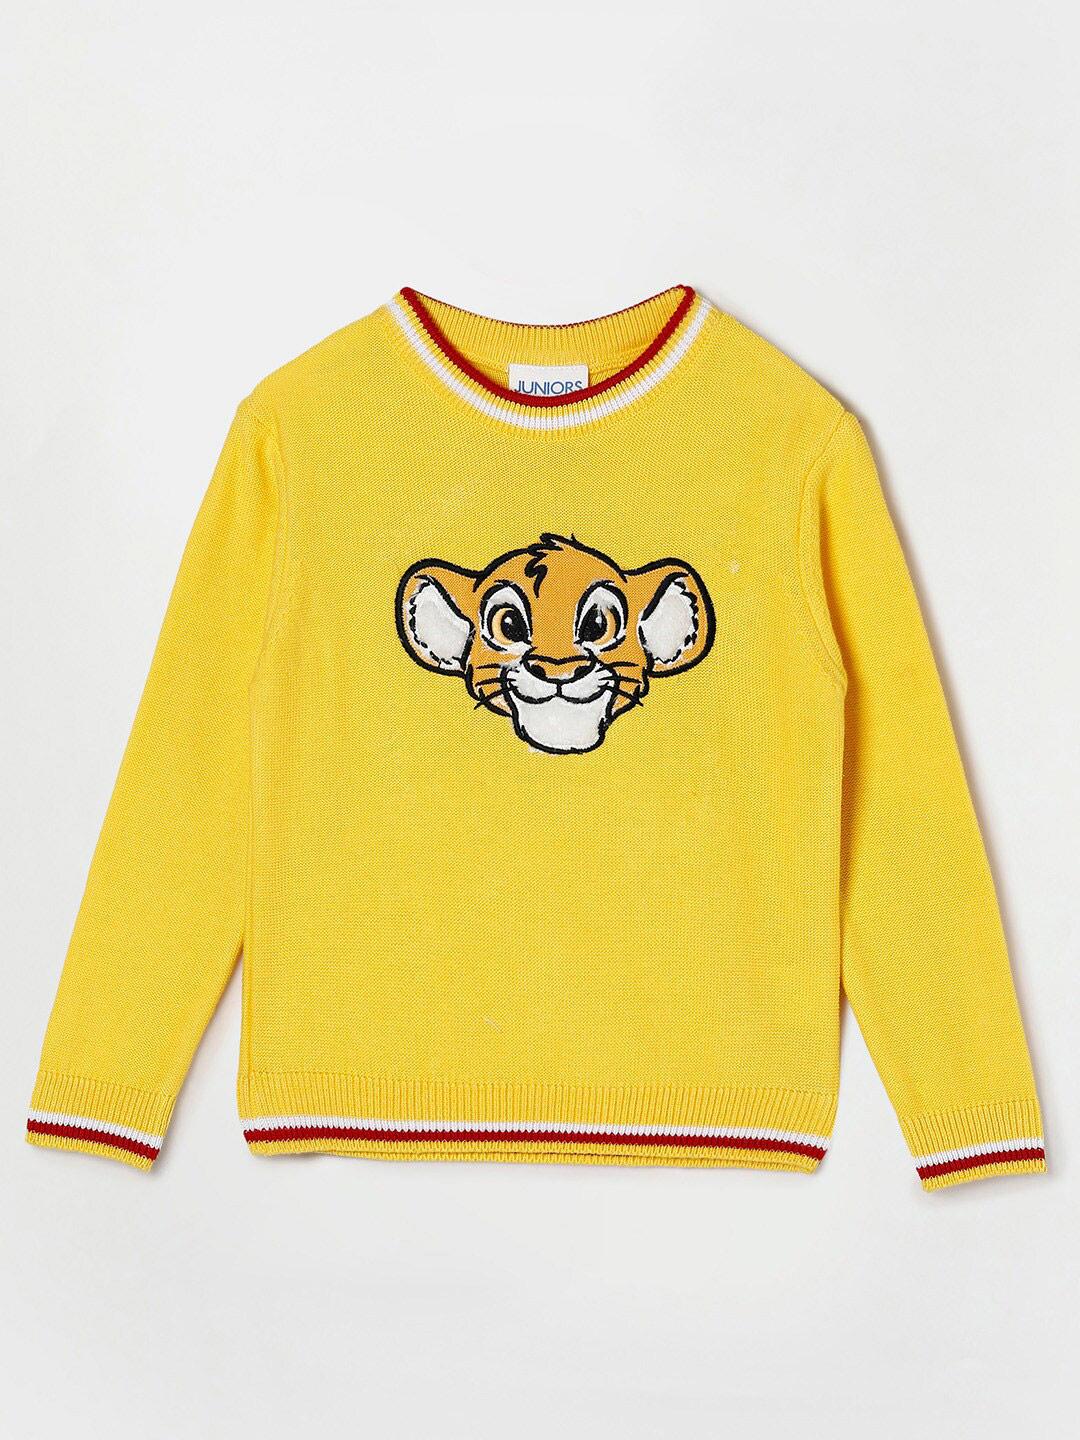 juniors-by-lifestyle-boys-yellow-&-white-printed-pullover